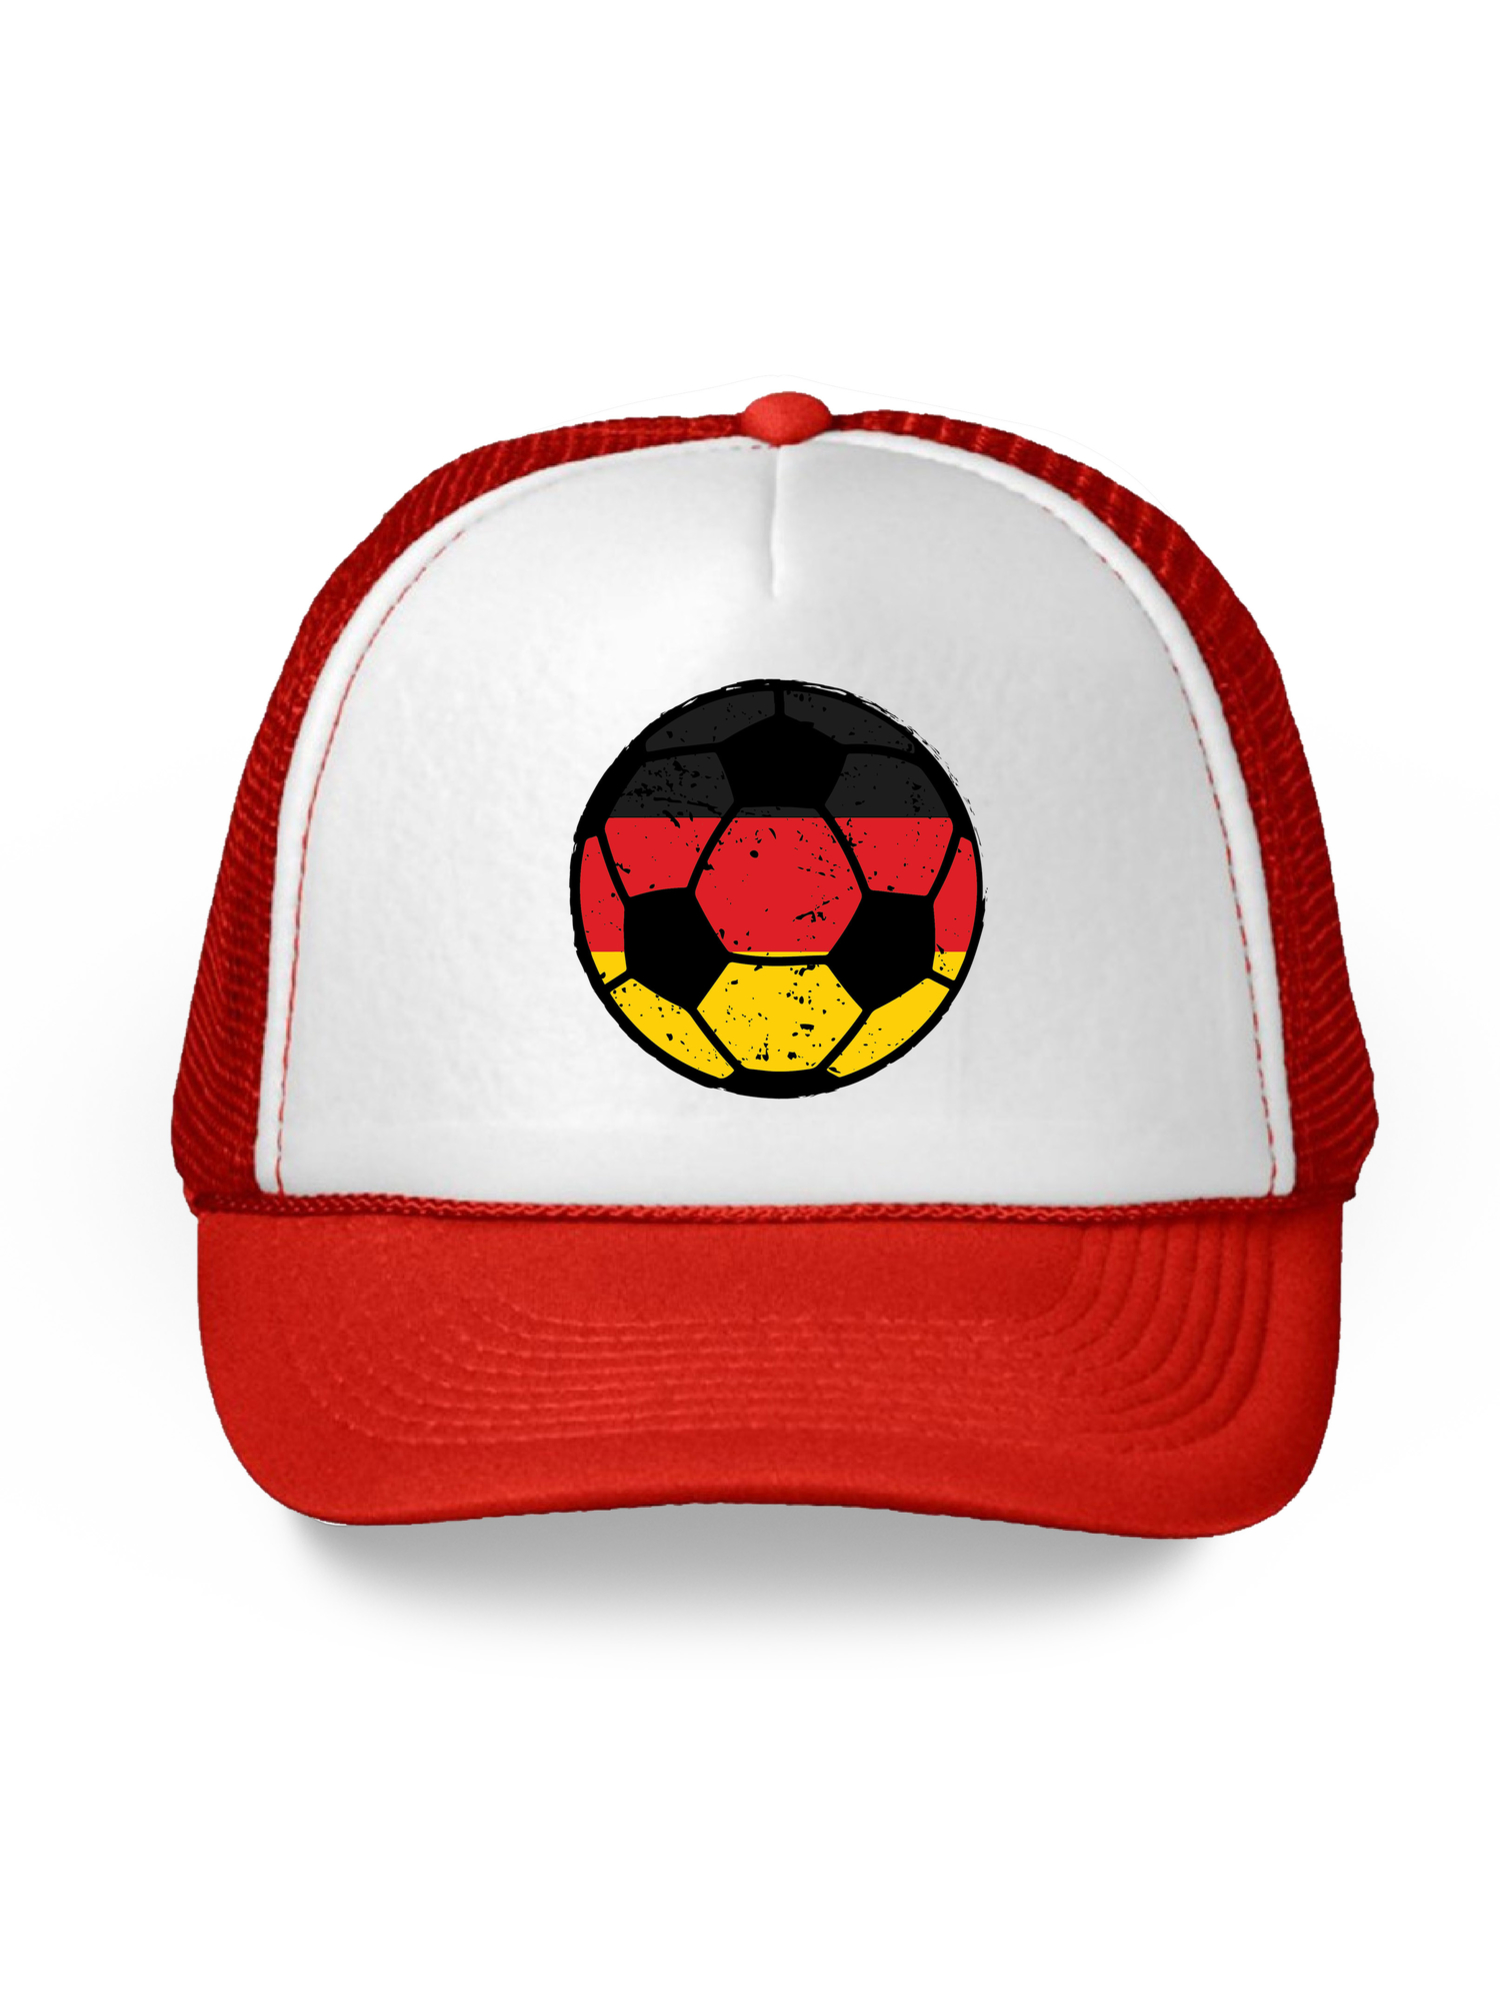 Awkward Styles Germany Soccer Ball Hat German Soccer Trucker Hat Germany 2018 Baseball Cap Germany Trucker Hats for Men and Women Hat Gifts from Germany German Baseball Hats German Flag Baseball Hat - image 1 of 6